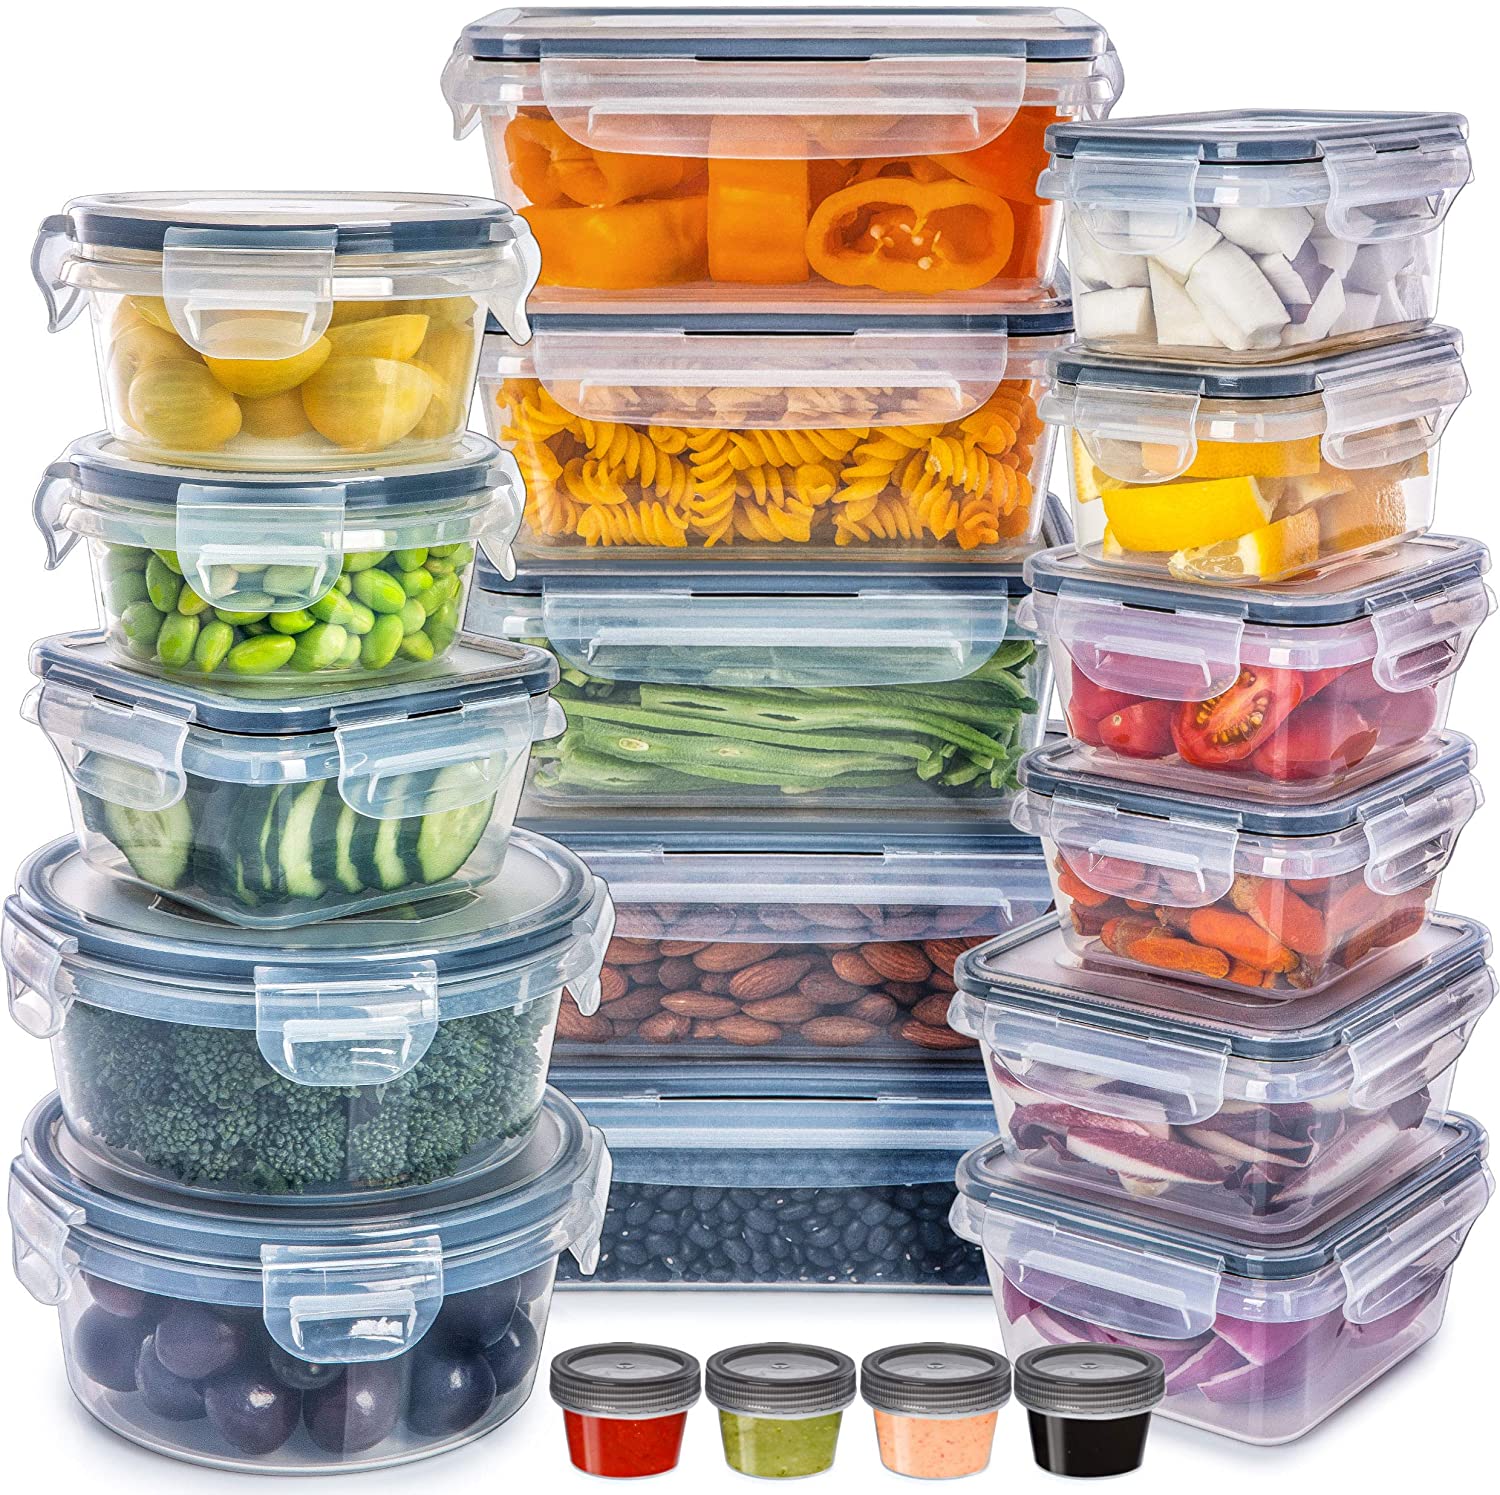 https://www.dontwasteyourmoney.com/wp-content/uploads/2021/08/fullstar-bpa-free-food-storage-containers-20-piece-food-storage-containers.jpg